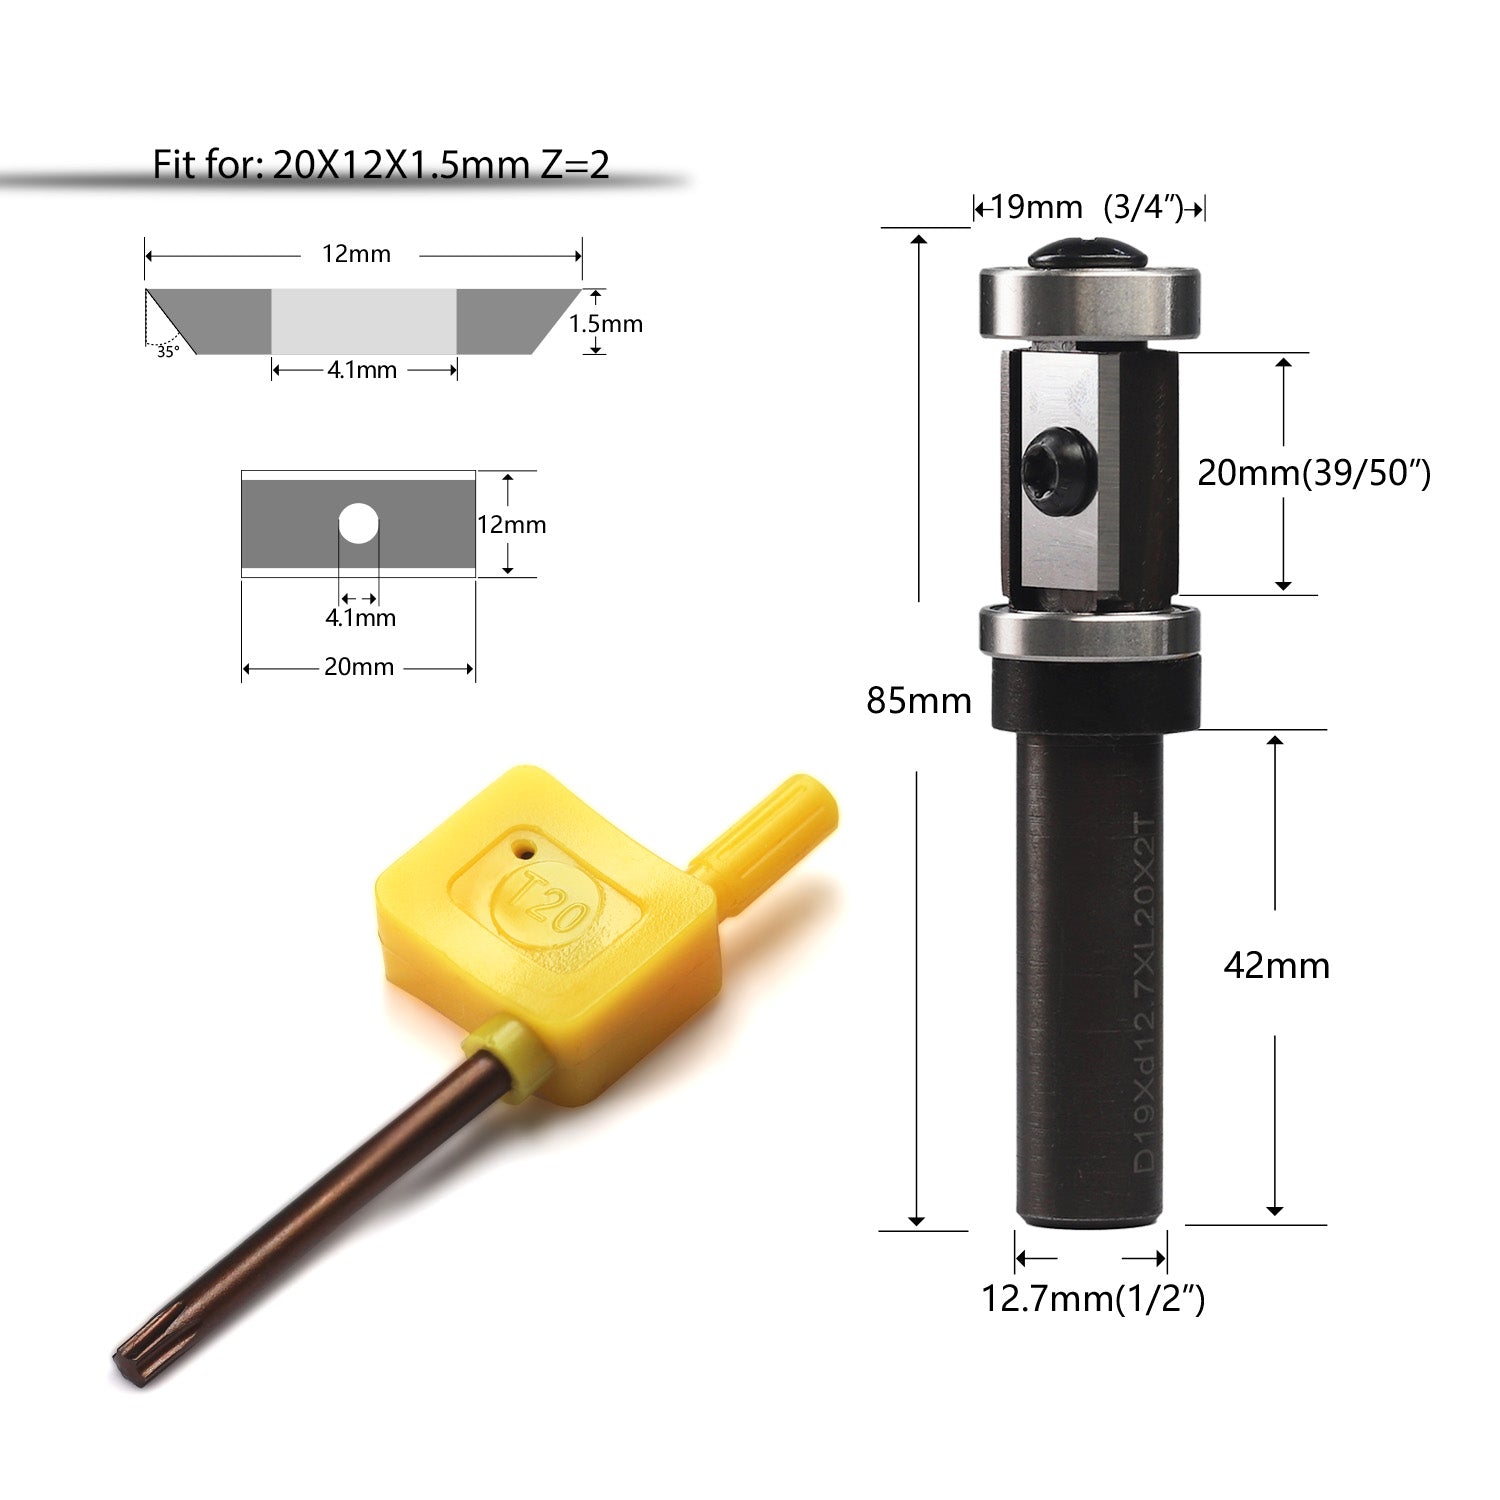 yeptooling double bearing flush trim router bit milling cutter for woodworking, 1/2 inch shank diameter, 3/4 inch cutting diameter, 39/50 inch cutting length, 3-3/10 inch overall length 